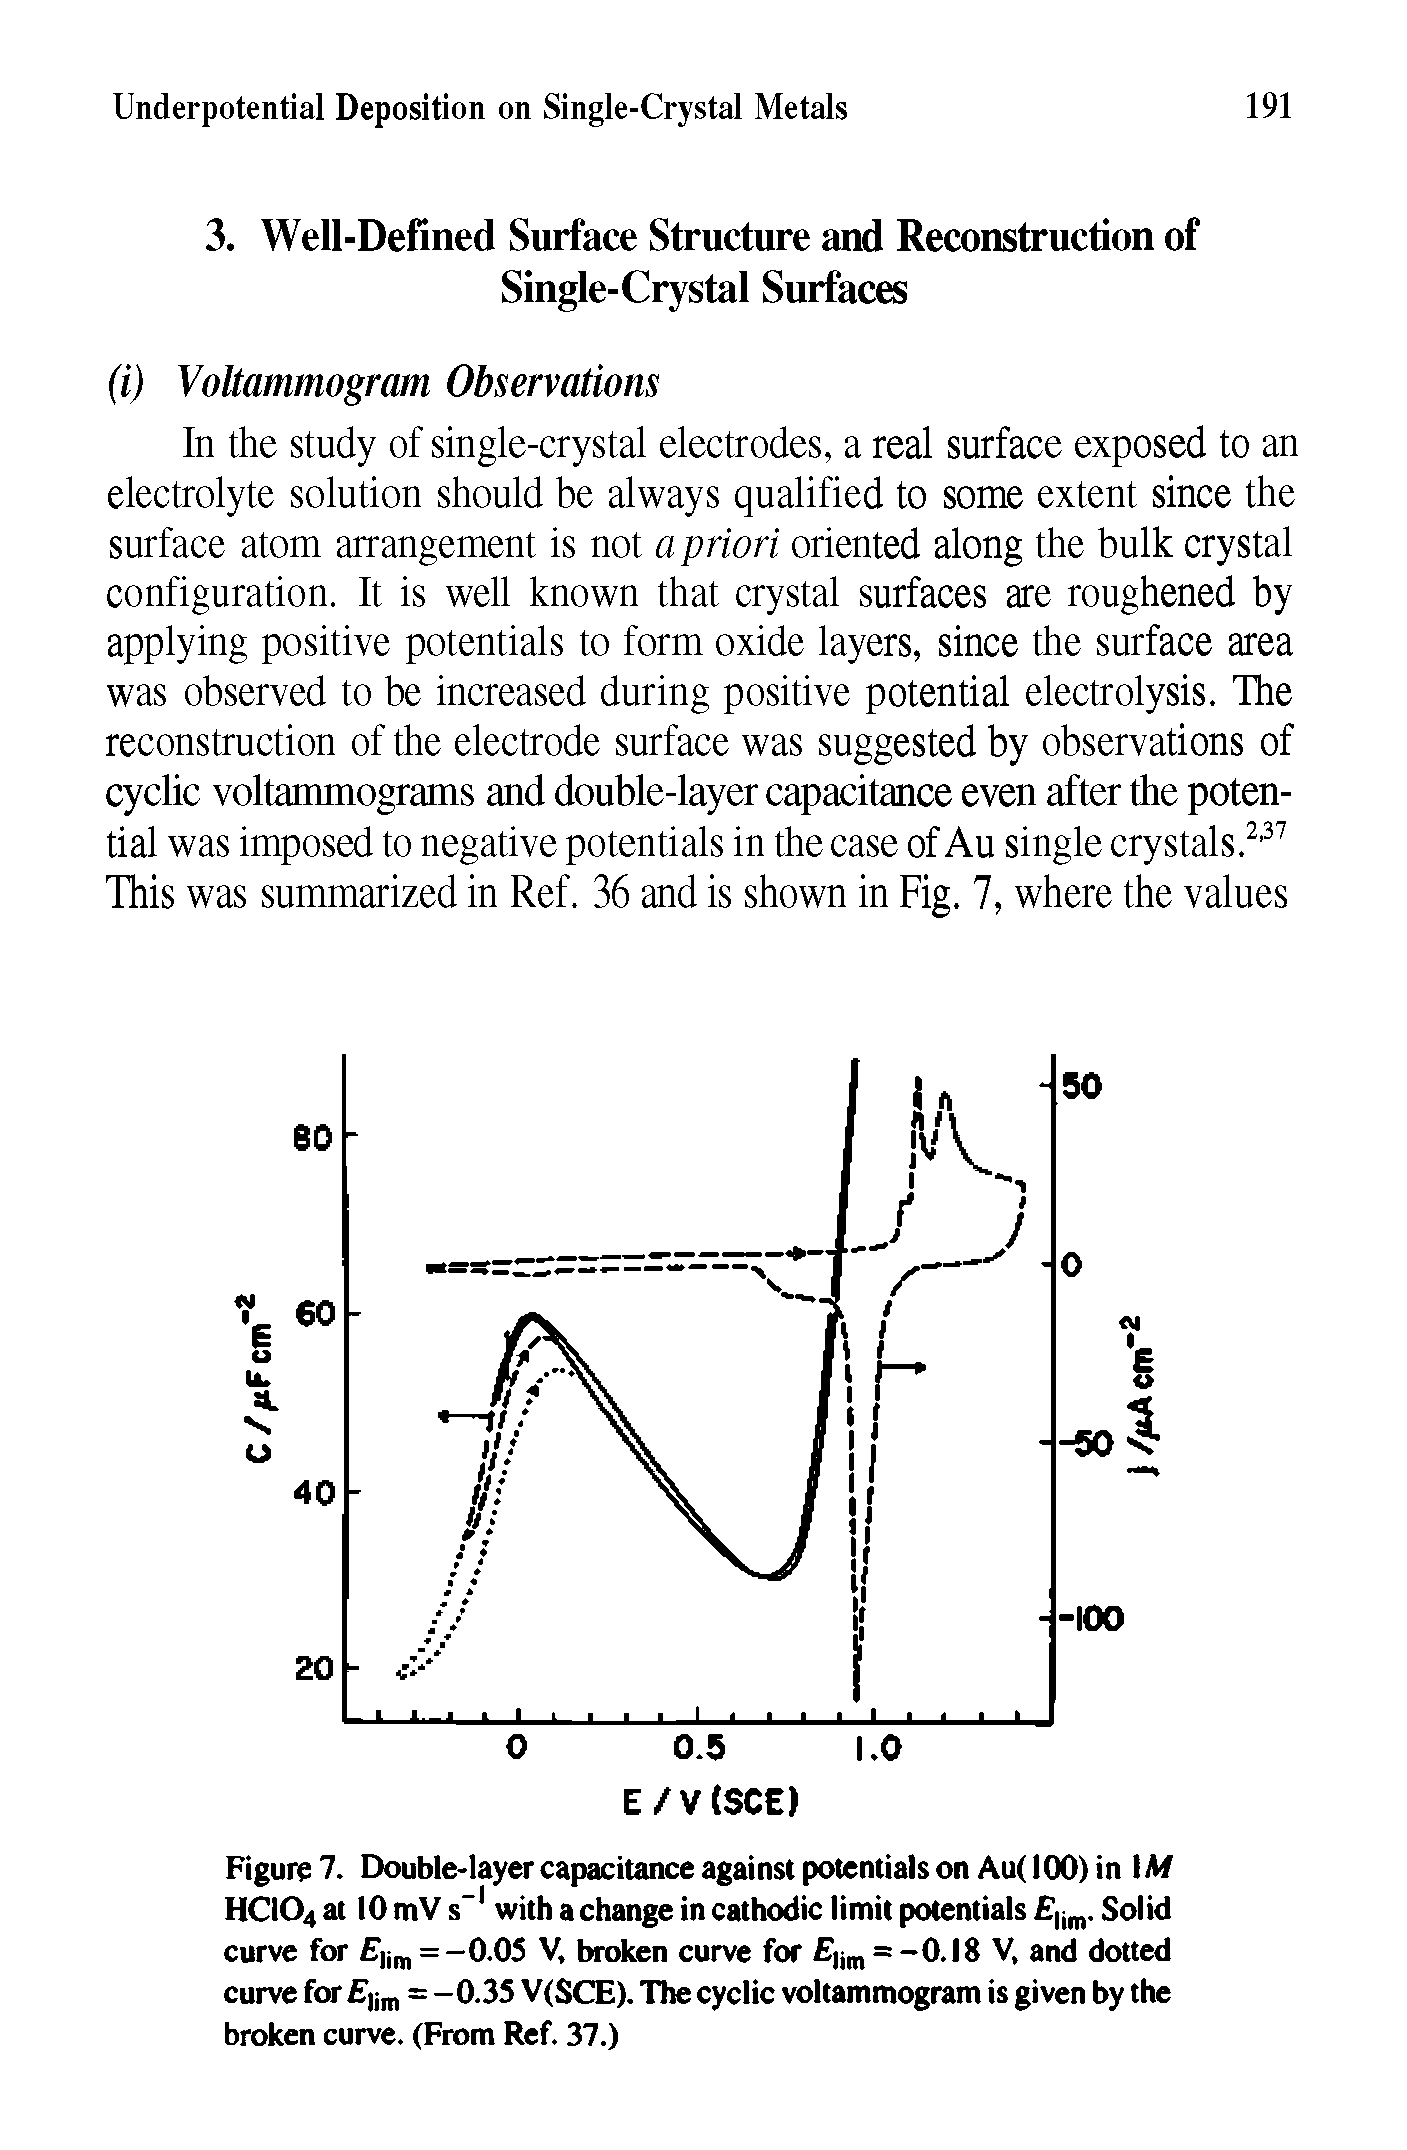 Figure . Double-layer capacitance against potentials on Au( 100) in IM HCIO4 at 10 mV s with a change in cathodic limit potentials . Solid curve for n = -0.05 V, broken curve for j = -O.I8 V, and dotted curve for = -0.35 V(SCE). The cyclic voltammogram is given by the broken curve. (From Ref. 37.)...